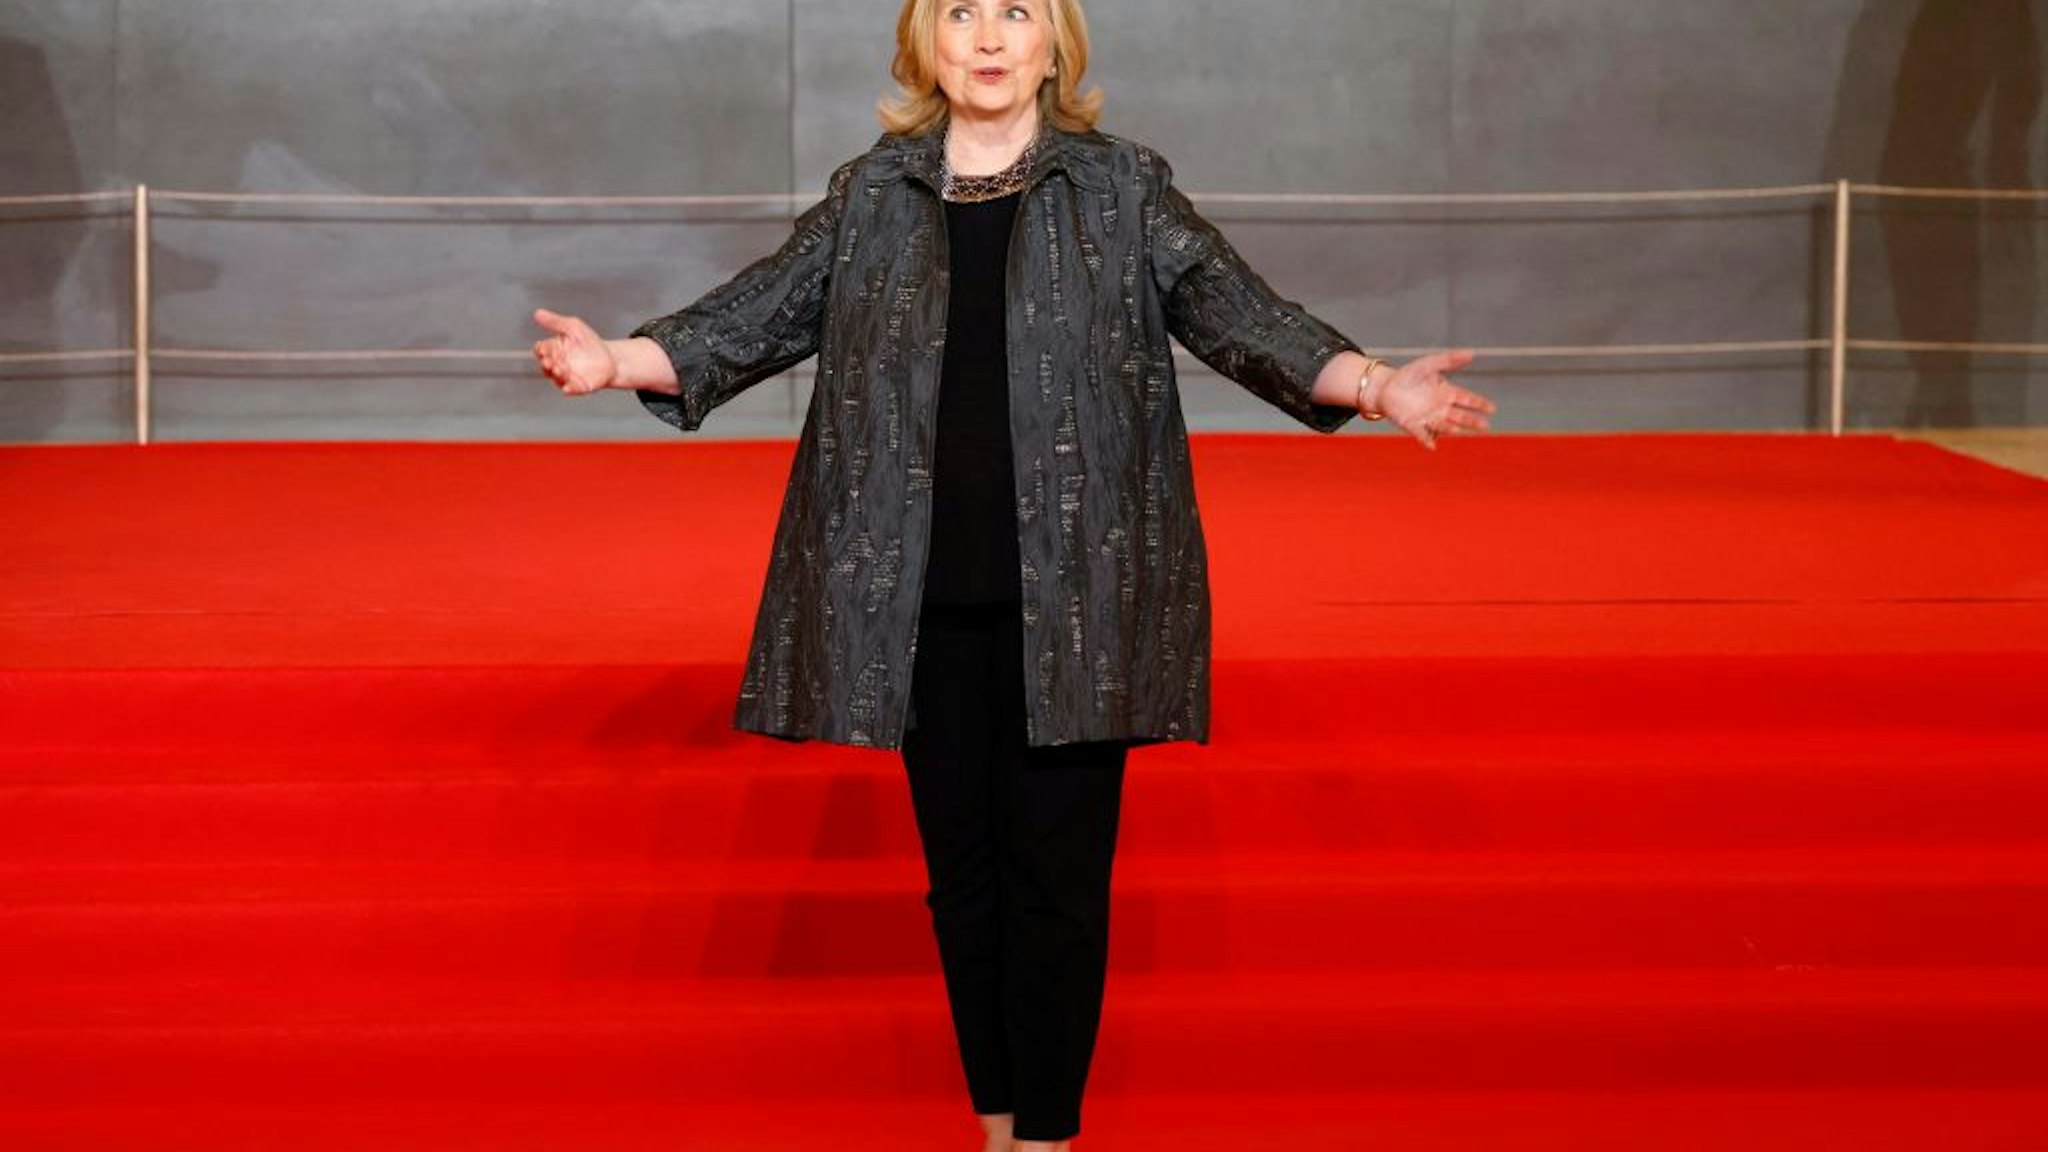 Former US Secretary of State Hillary Clinton arrives to the opening session of the Generation Equality Forum, a global gathering for gender equality convened by UN Women and co-hosted by the governments of Mexico and France in partnership with youth and civil society, in Paris on June 30, 2021.